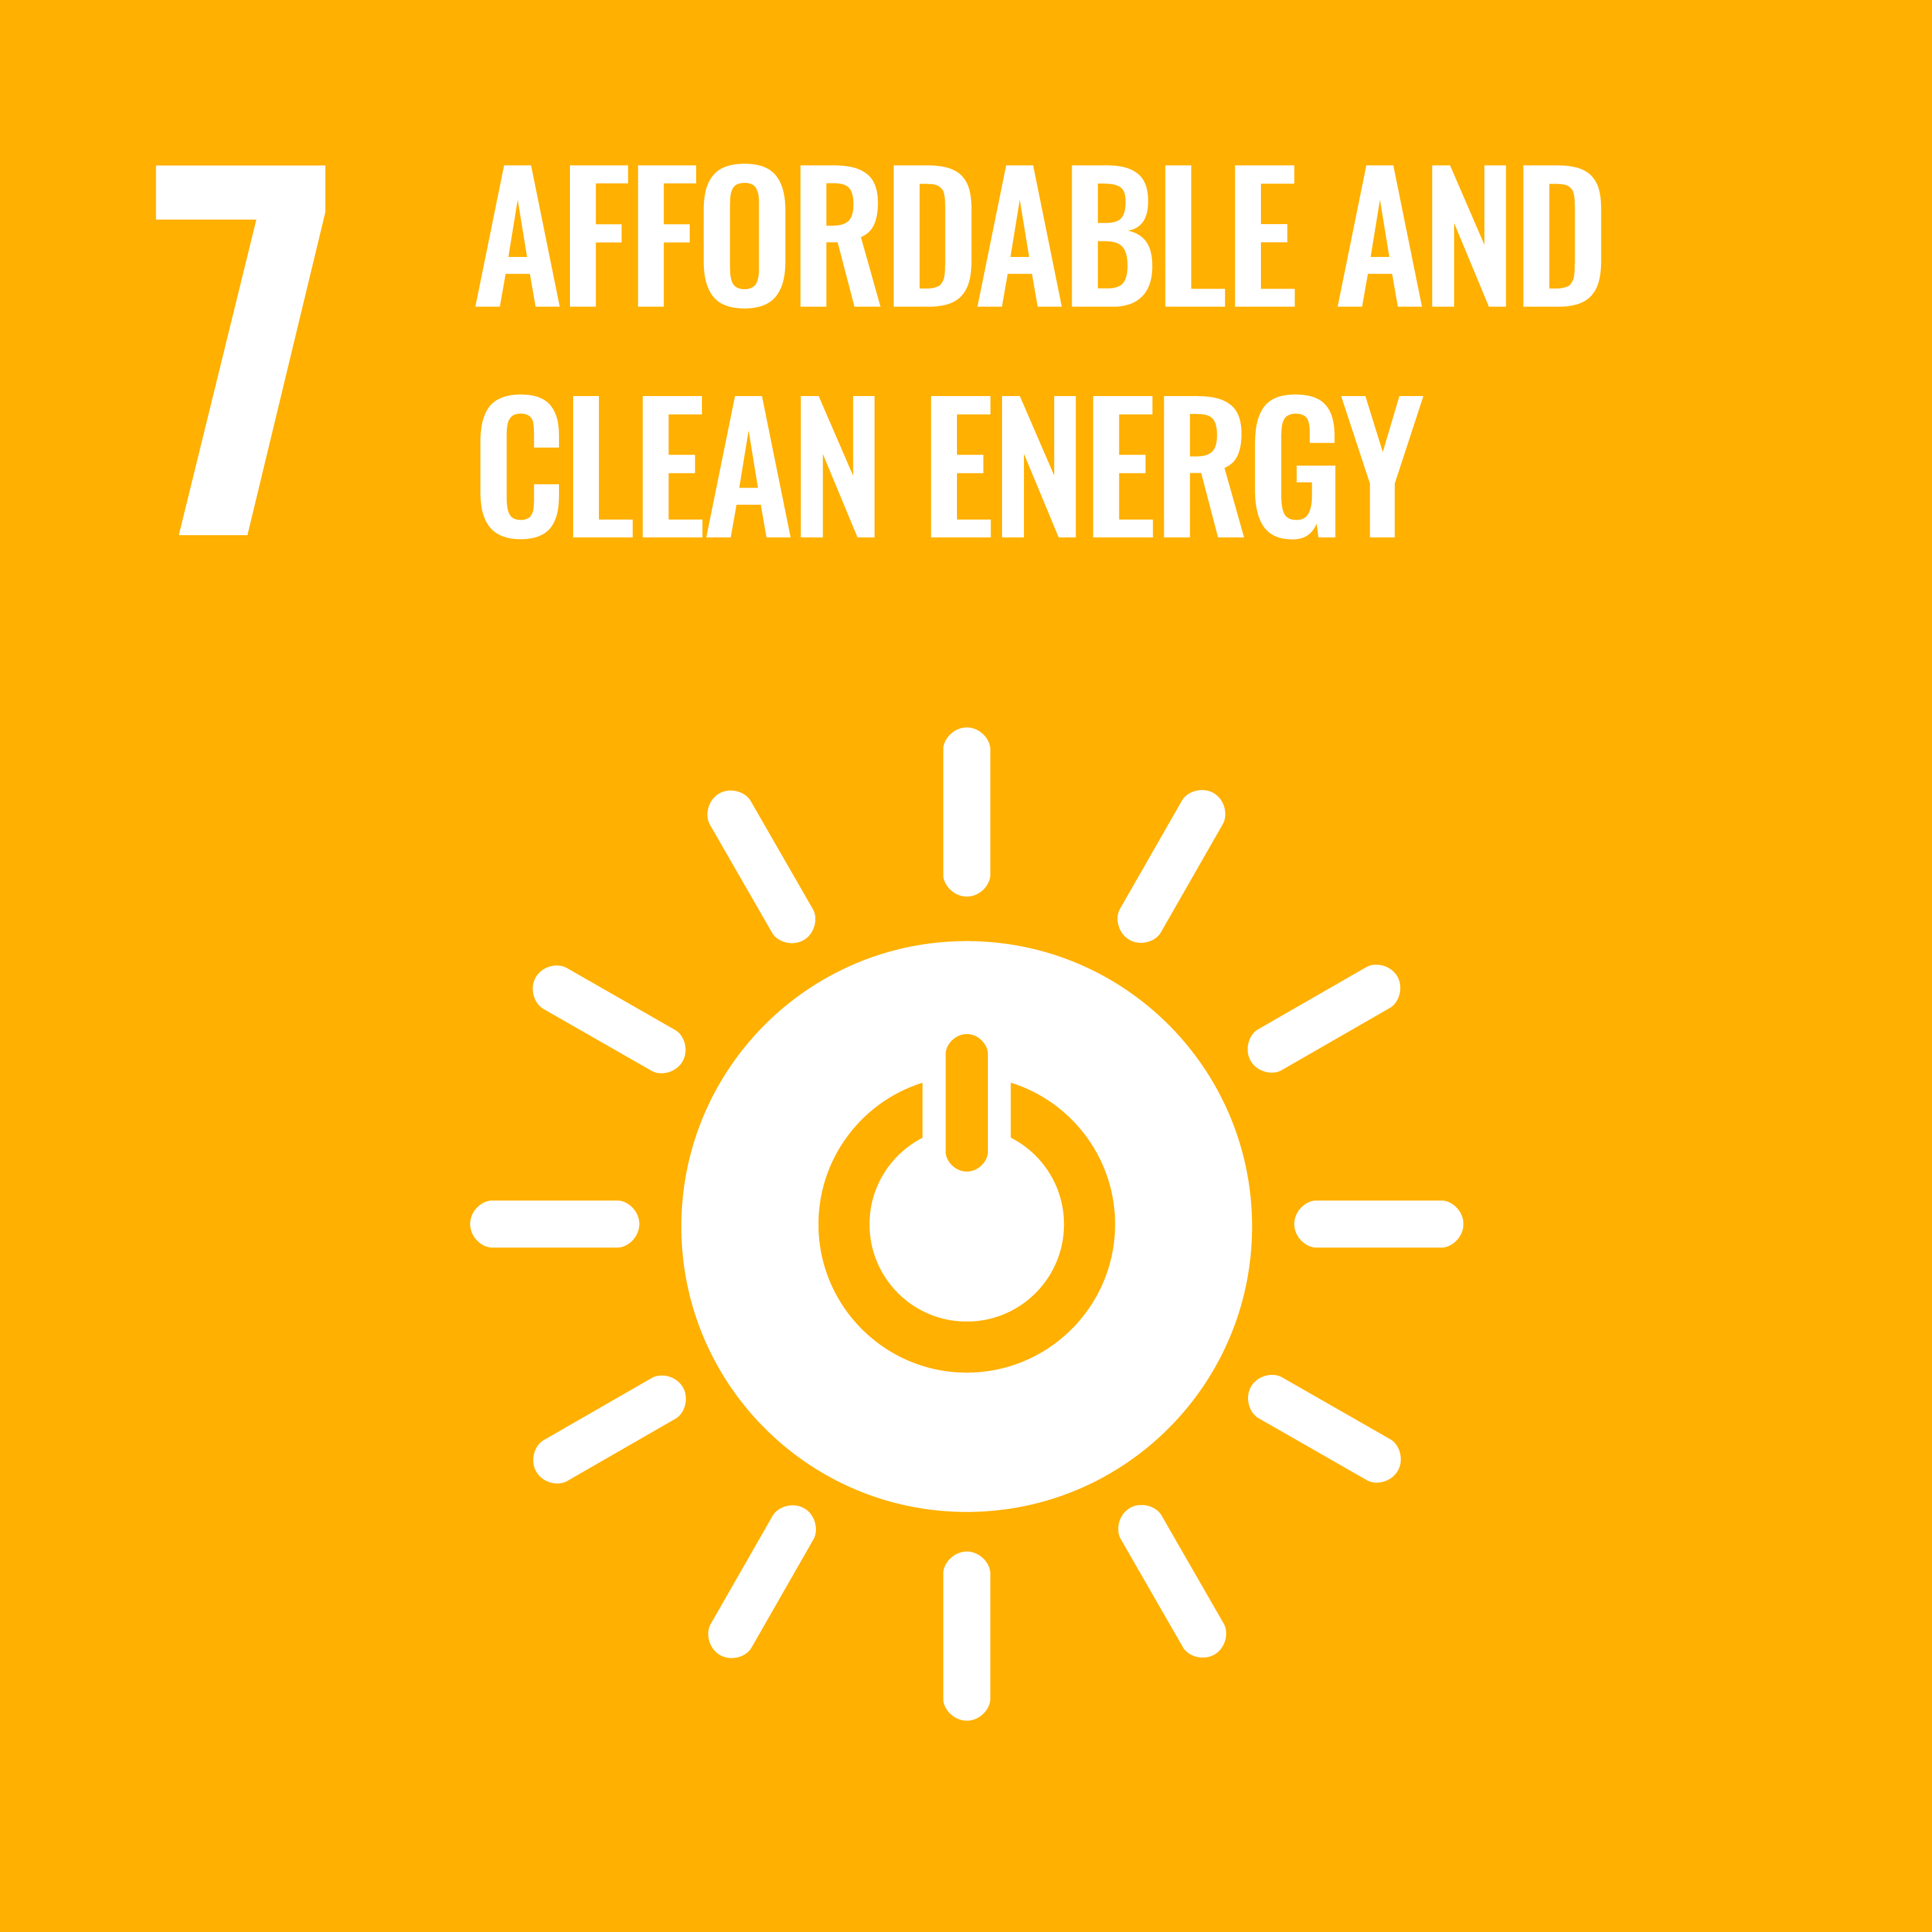 A yellow icon depicting a sun and the text "7: Affordable and clean energy"